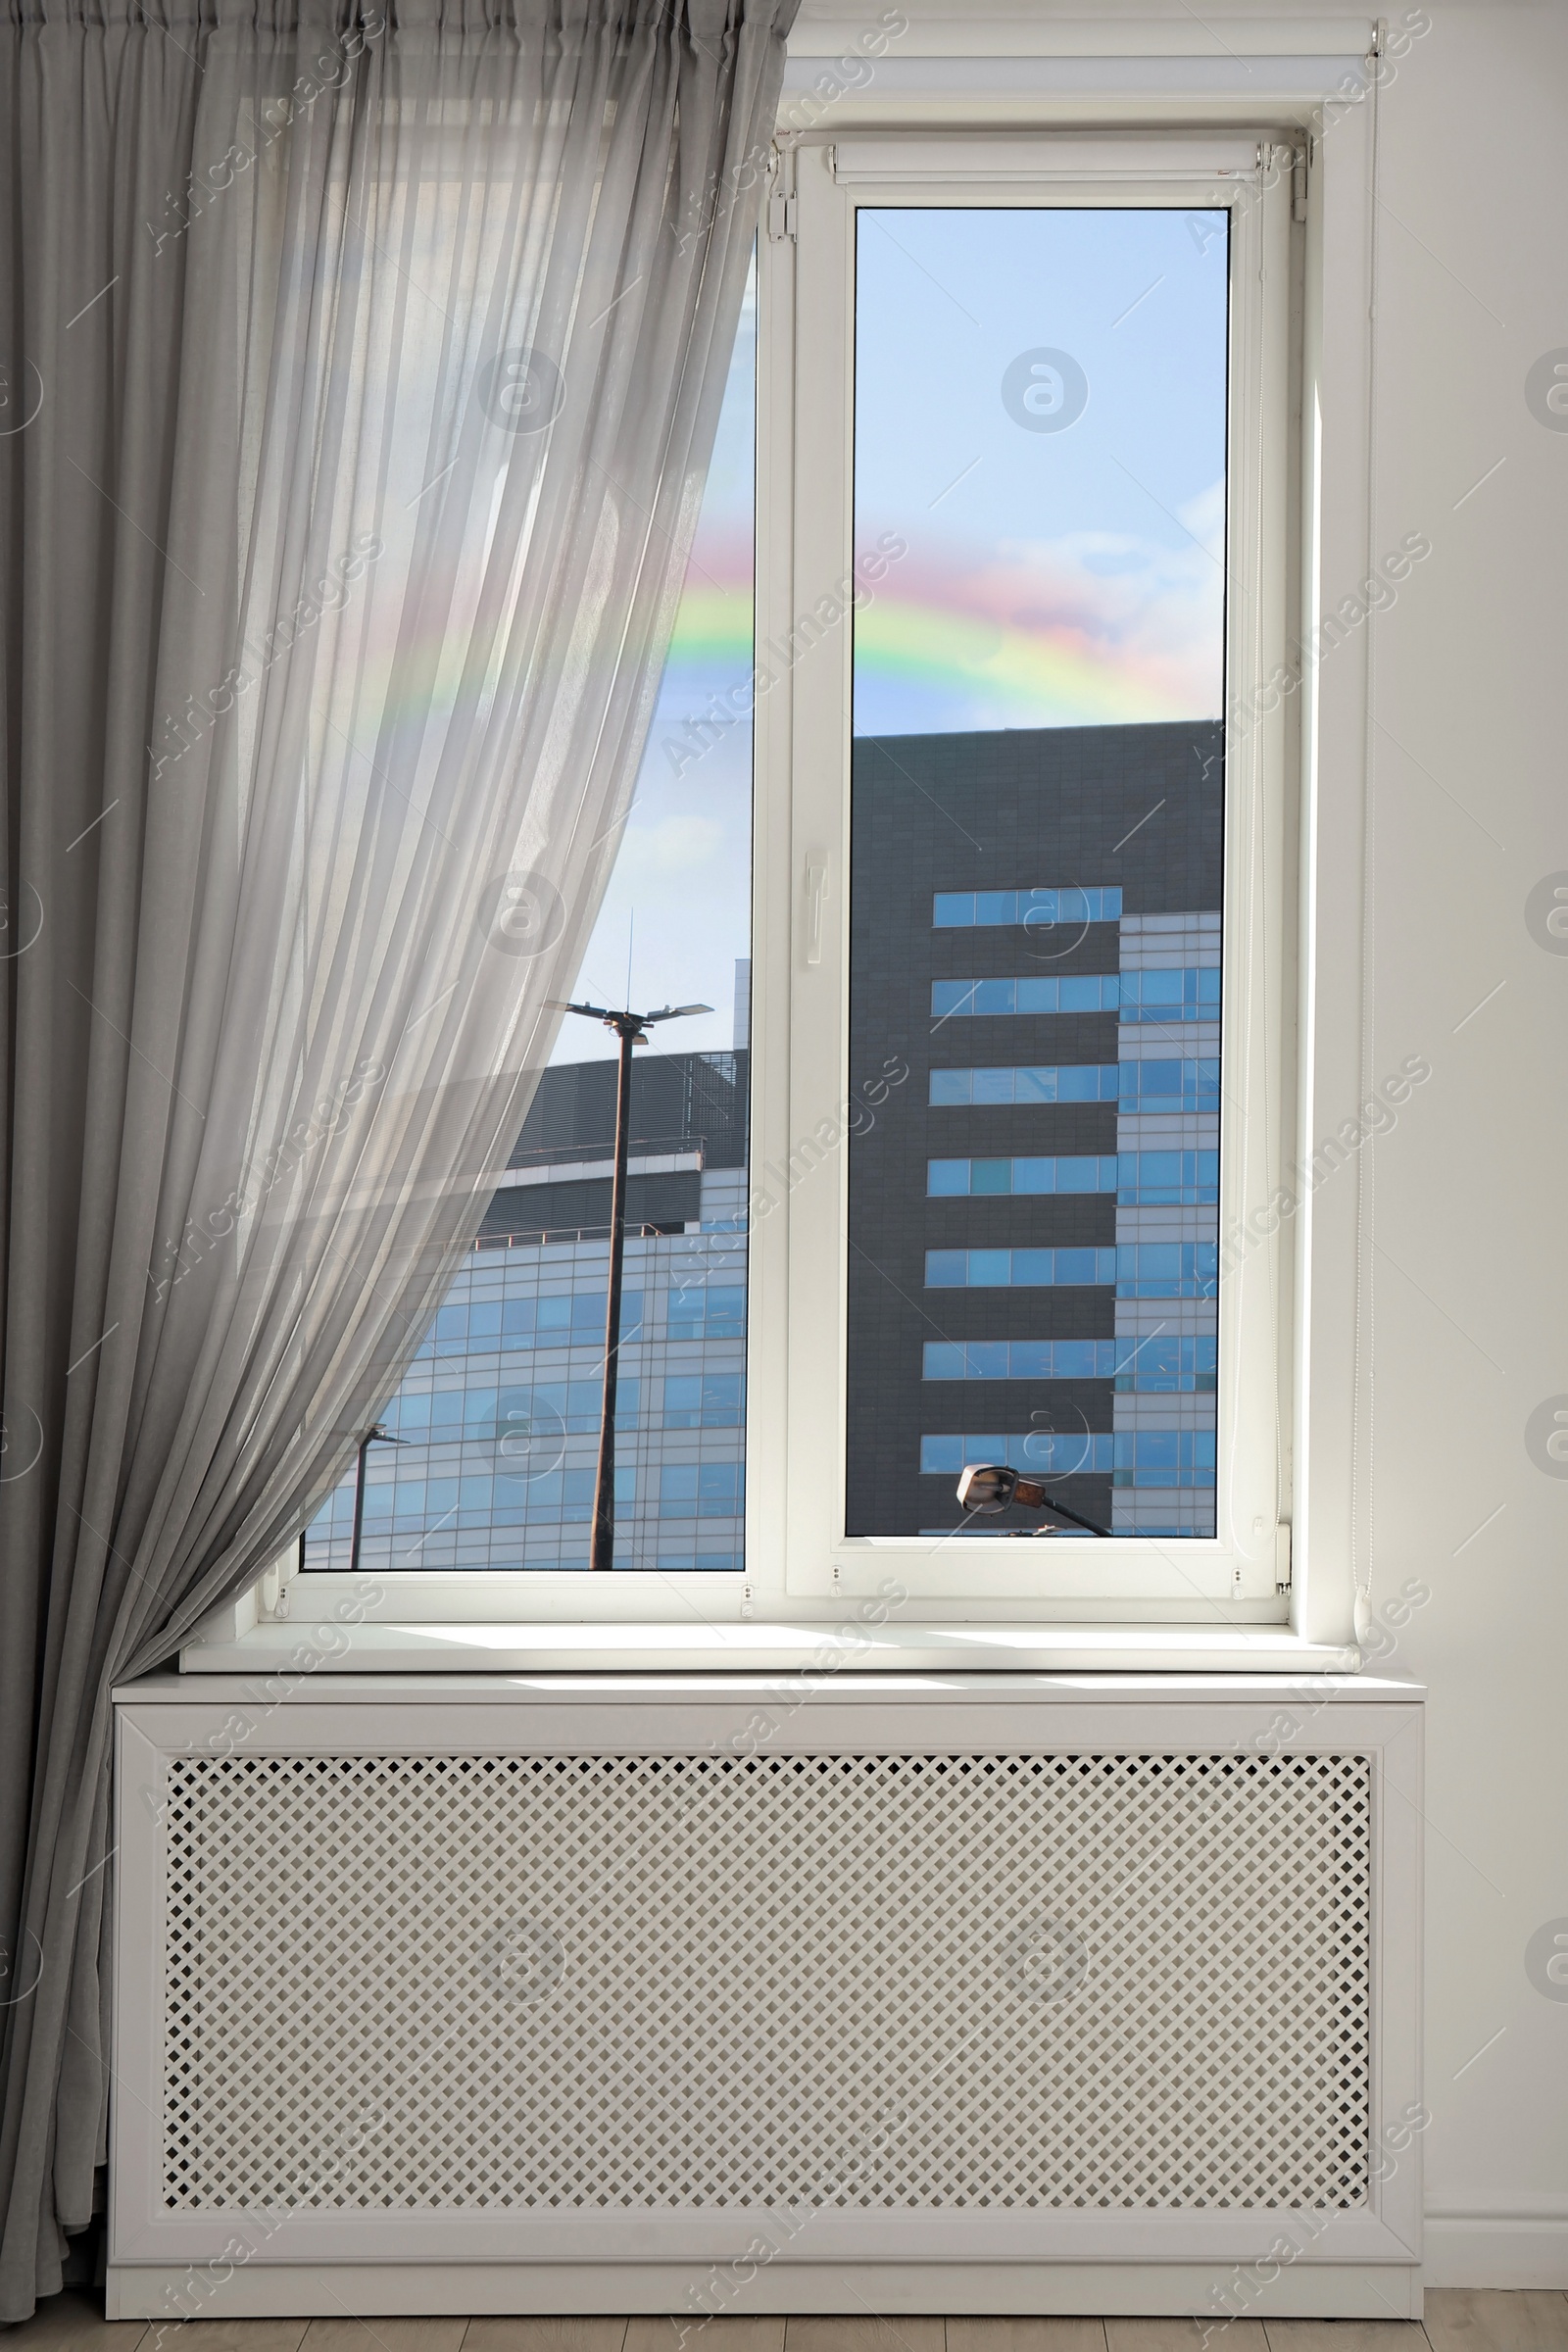 Image of View of beautiful rainbow in blue sky through window